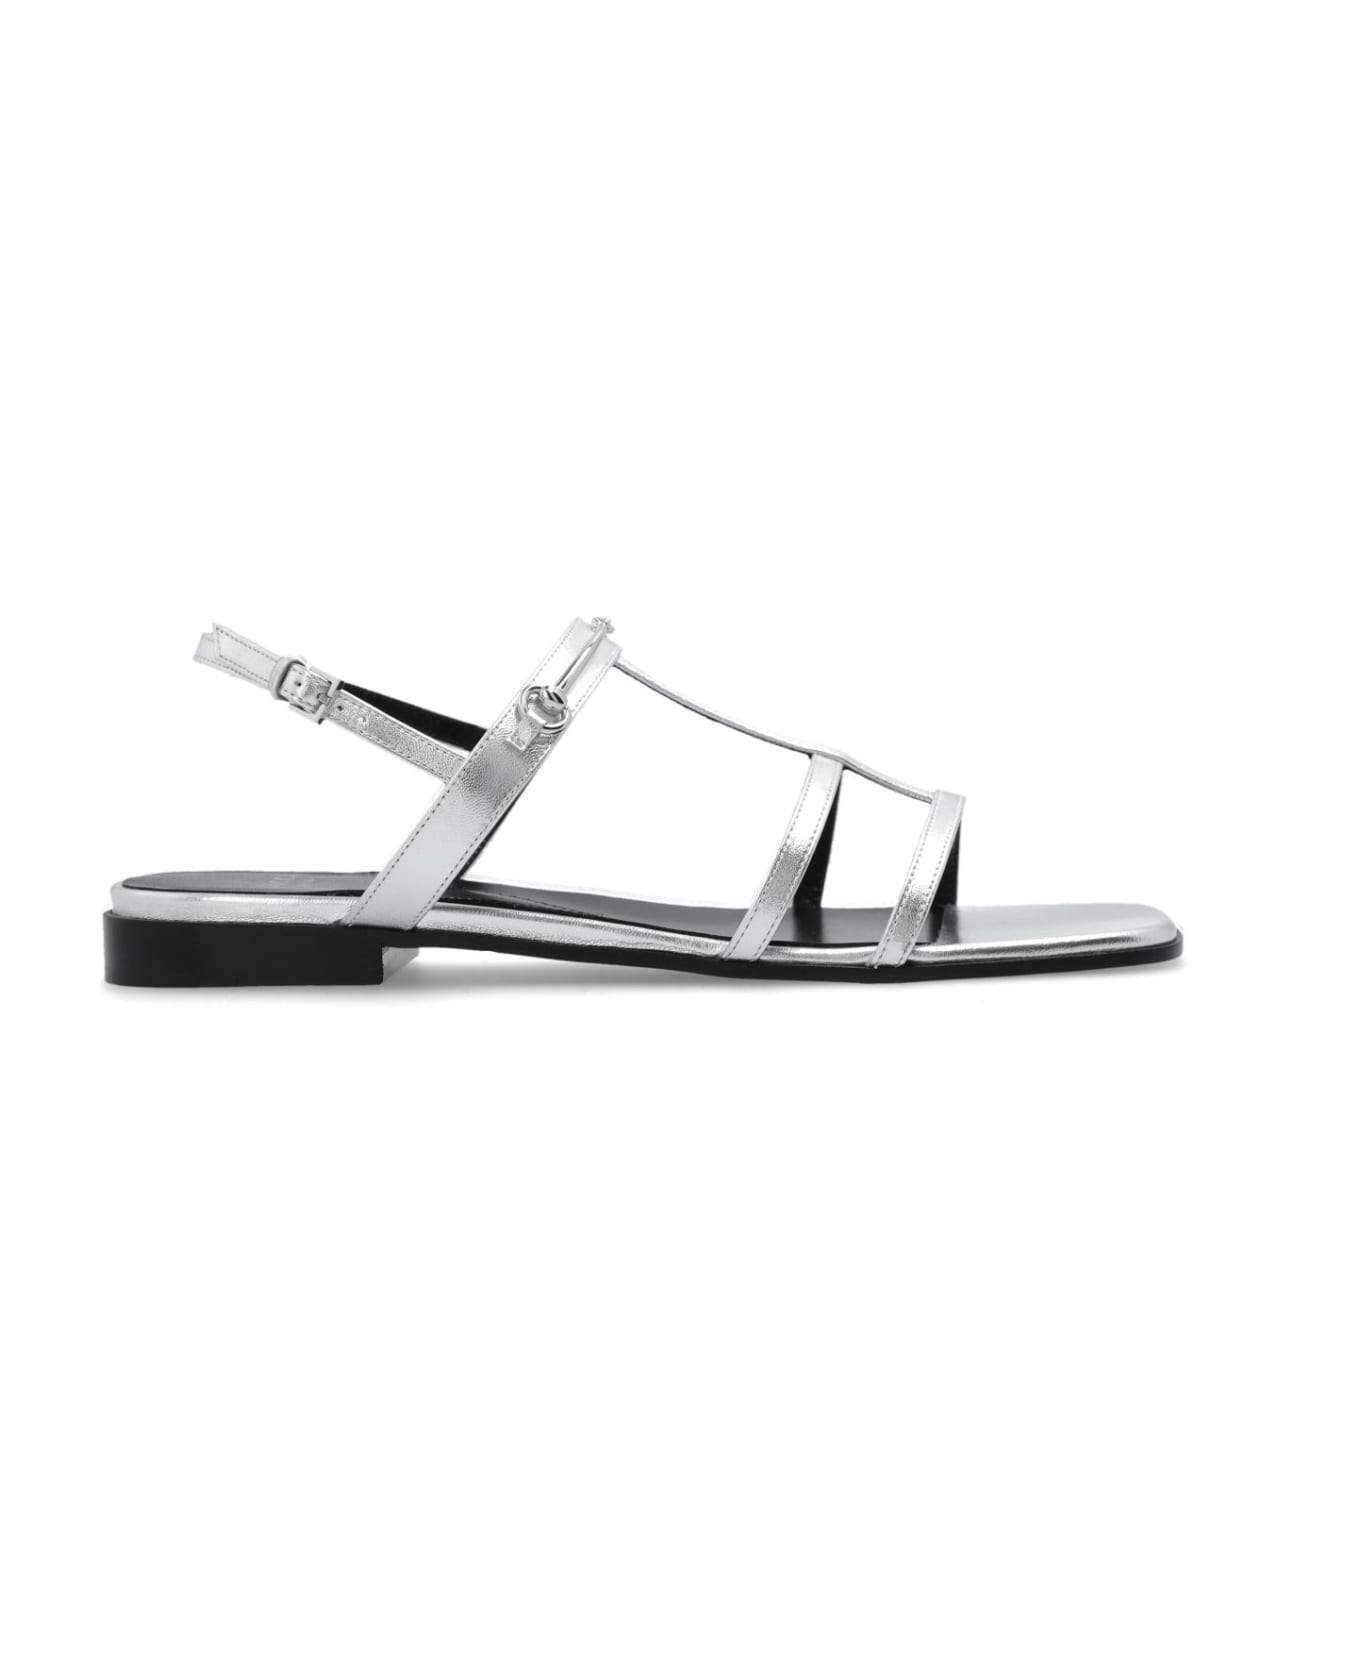 Gucci Leather Sandals - Silver サンダル